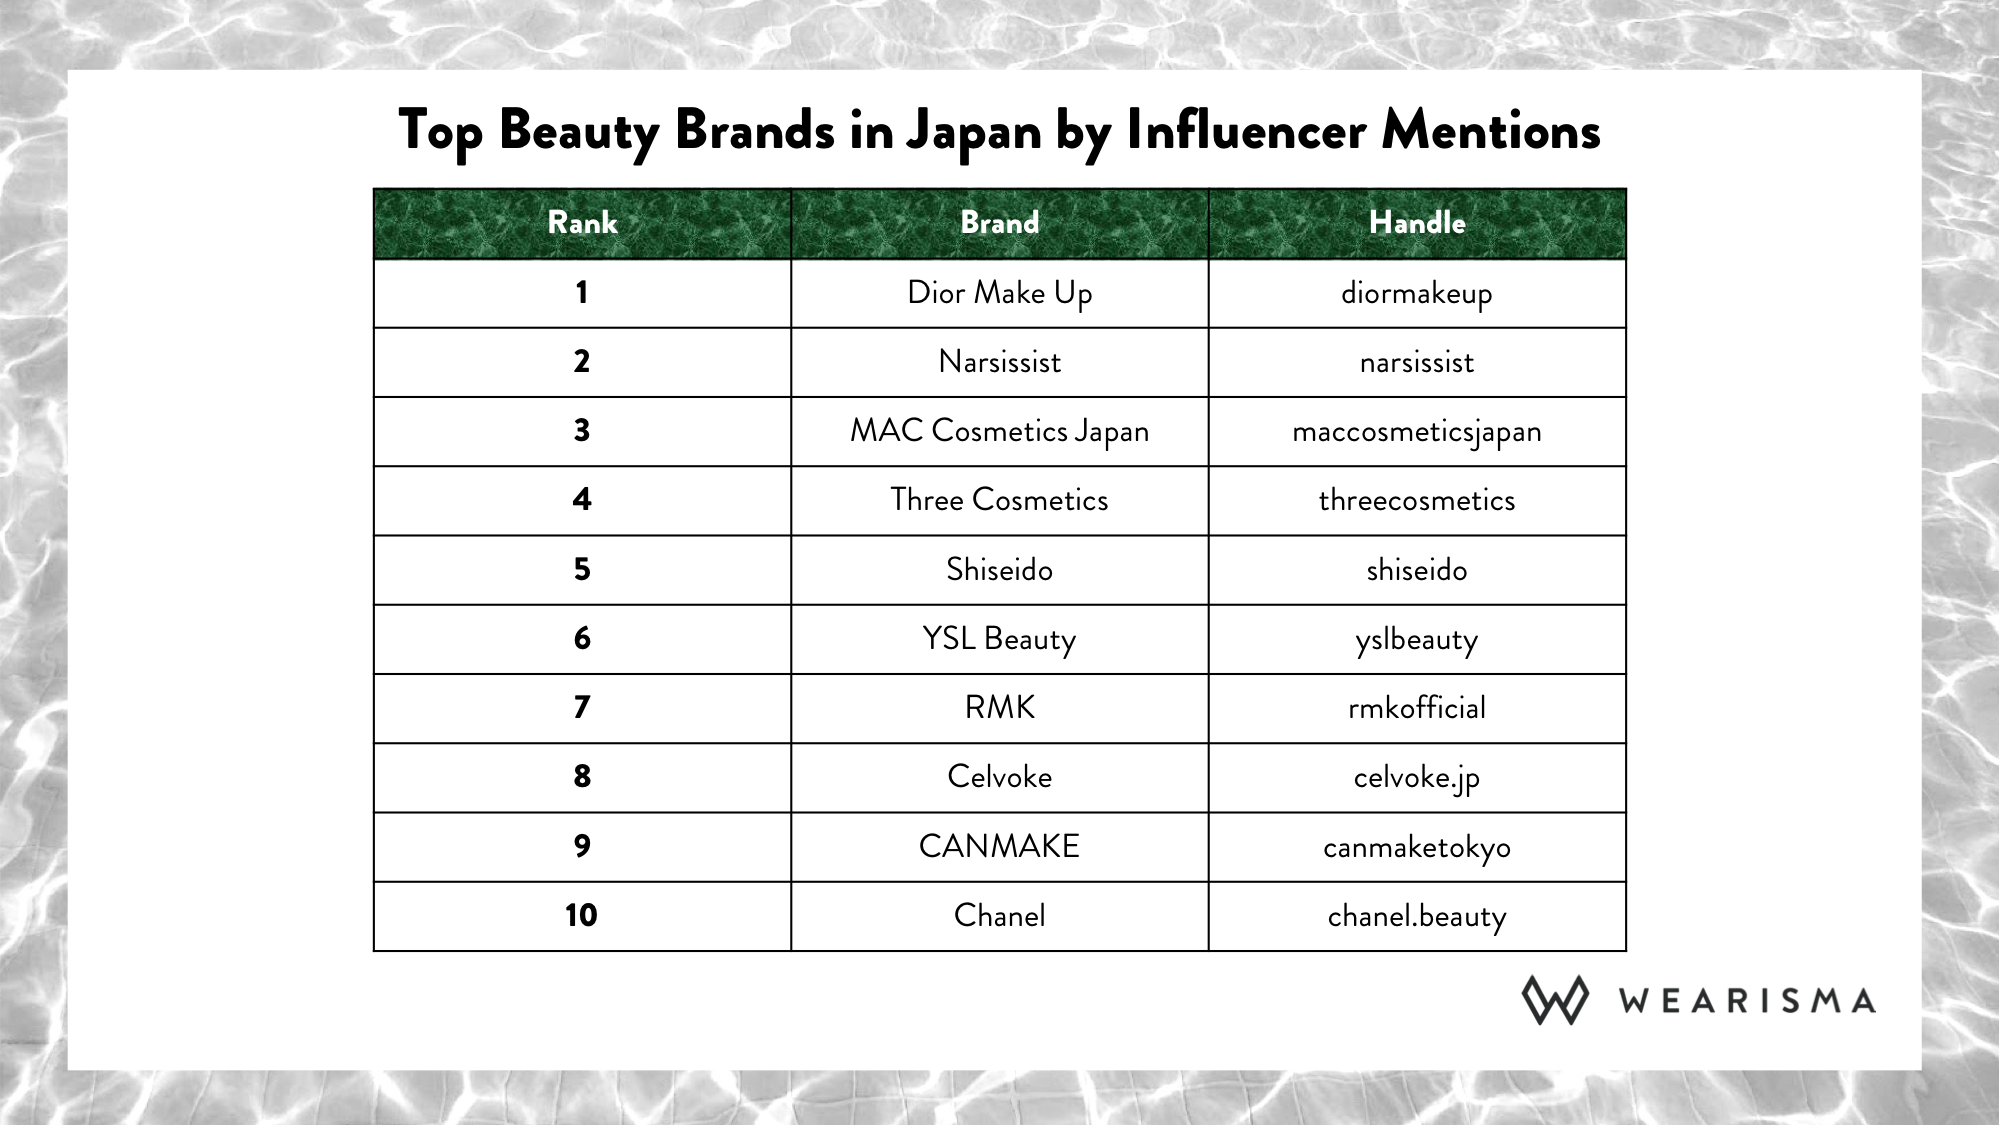 Which top Beauty Brands are mentioned most by Japanese Influencers